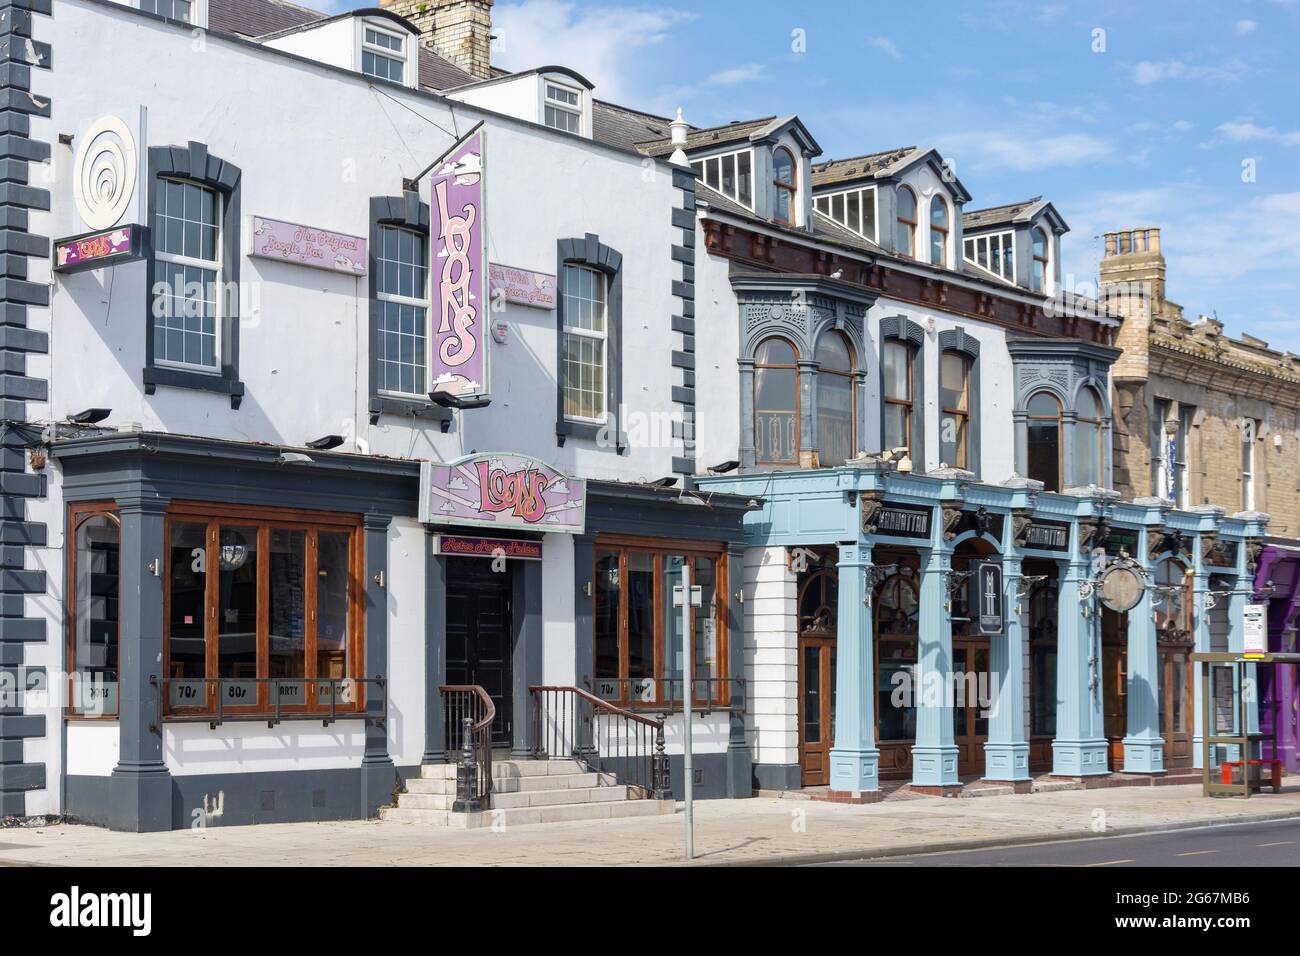 Bar frontages, Victoria Road, Hartlepool, County Durham, England, United Kingdom Stock Photo